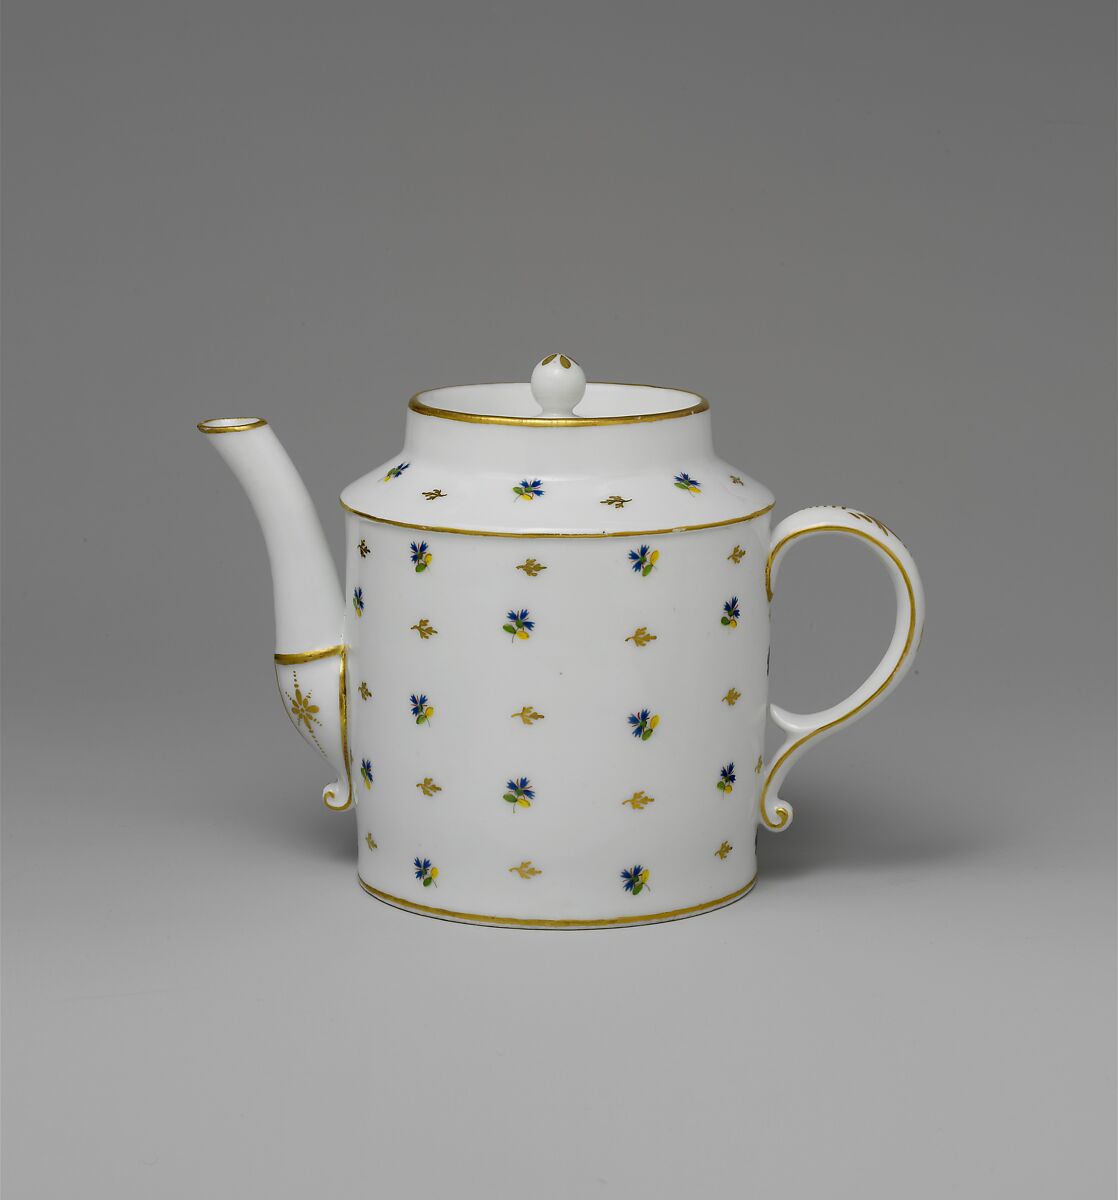 Teapot, Porcelain, French, possibly 